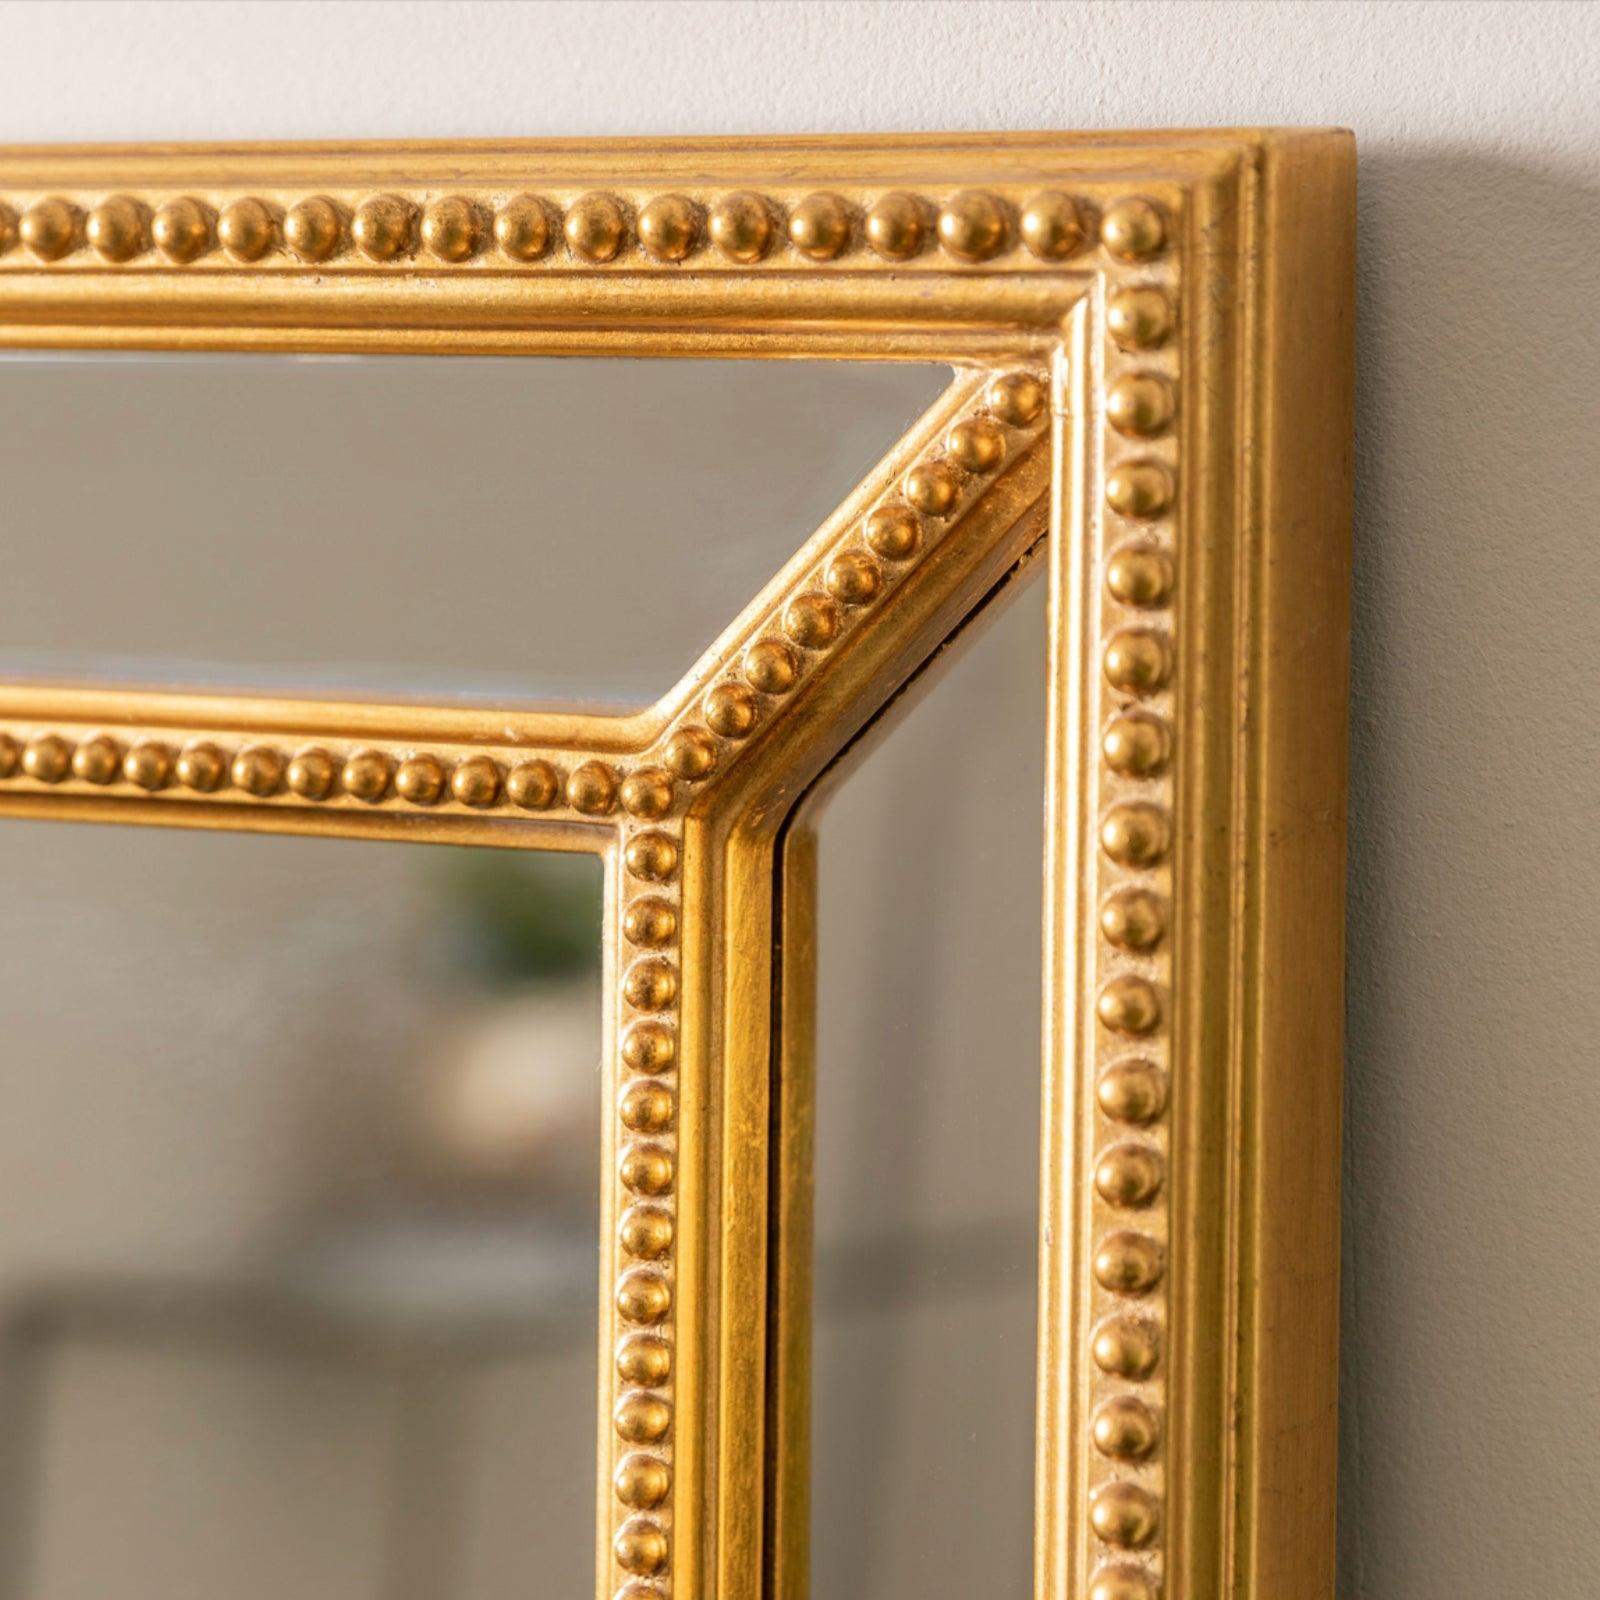 Beaded Rectangular Wall Mirror with Antique Gold Leaf Frame - The Farthing